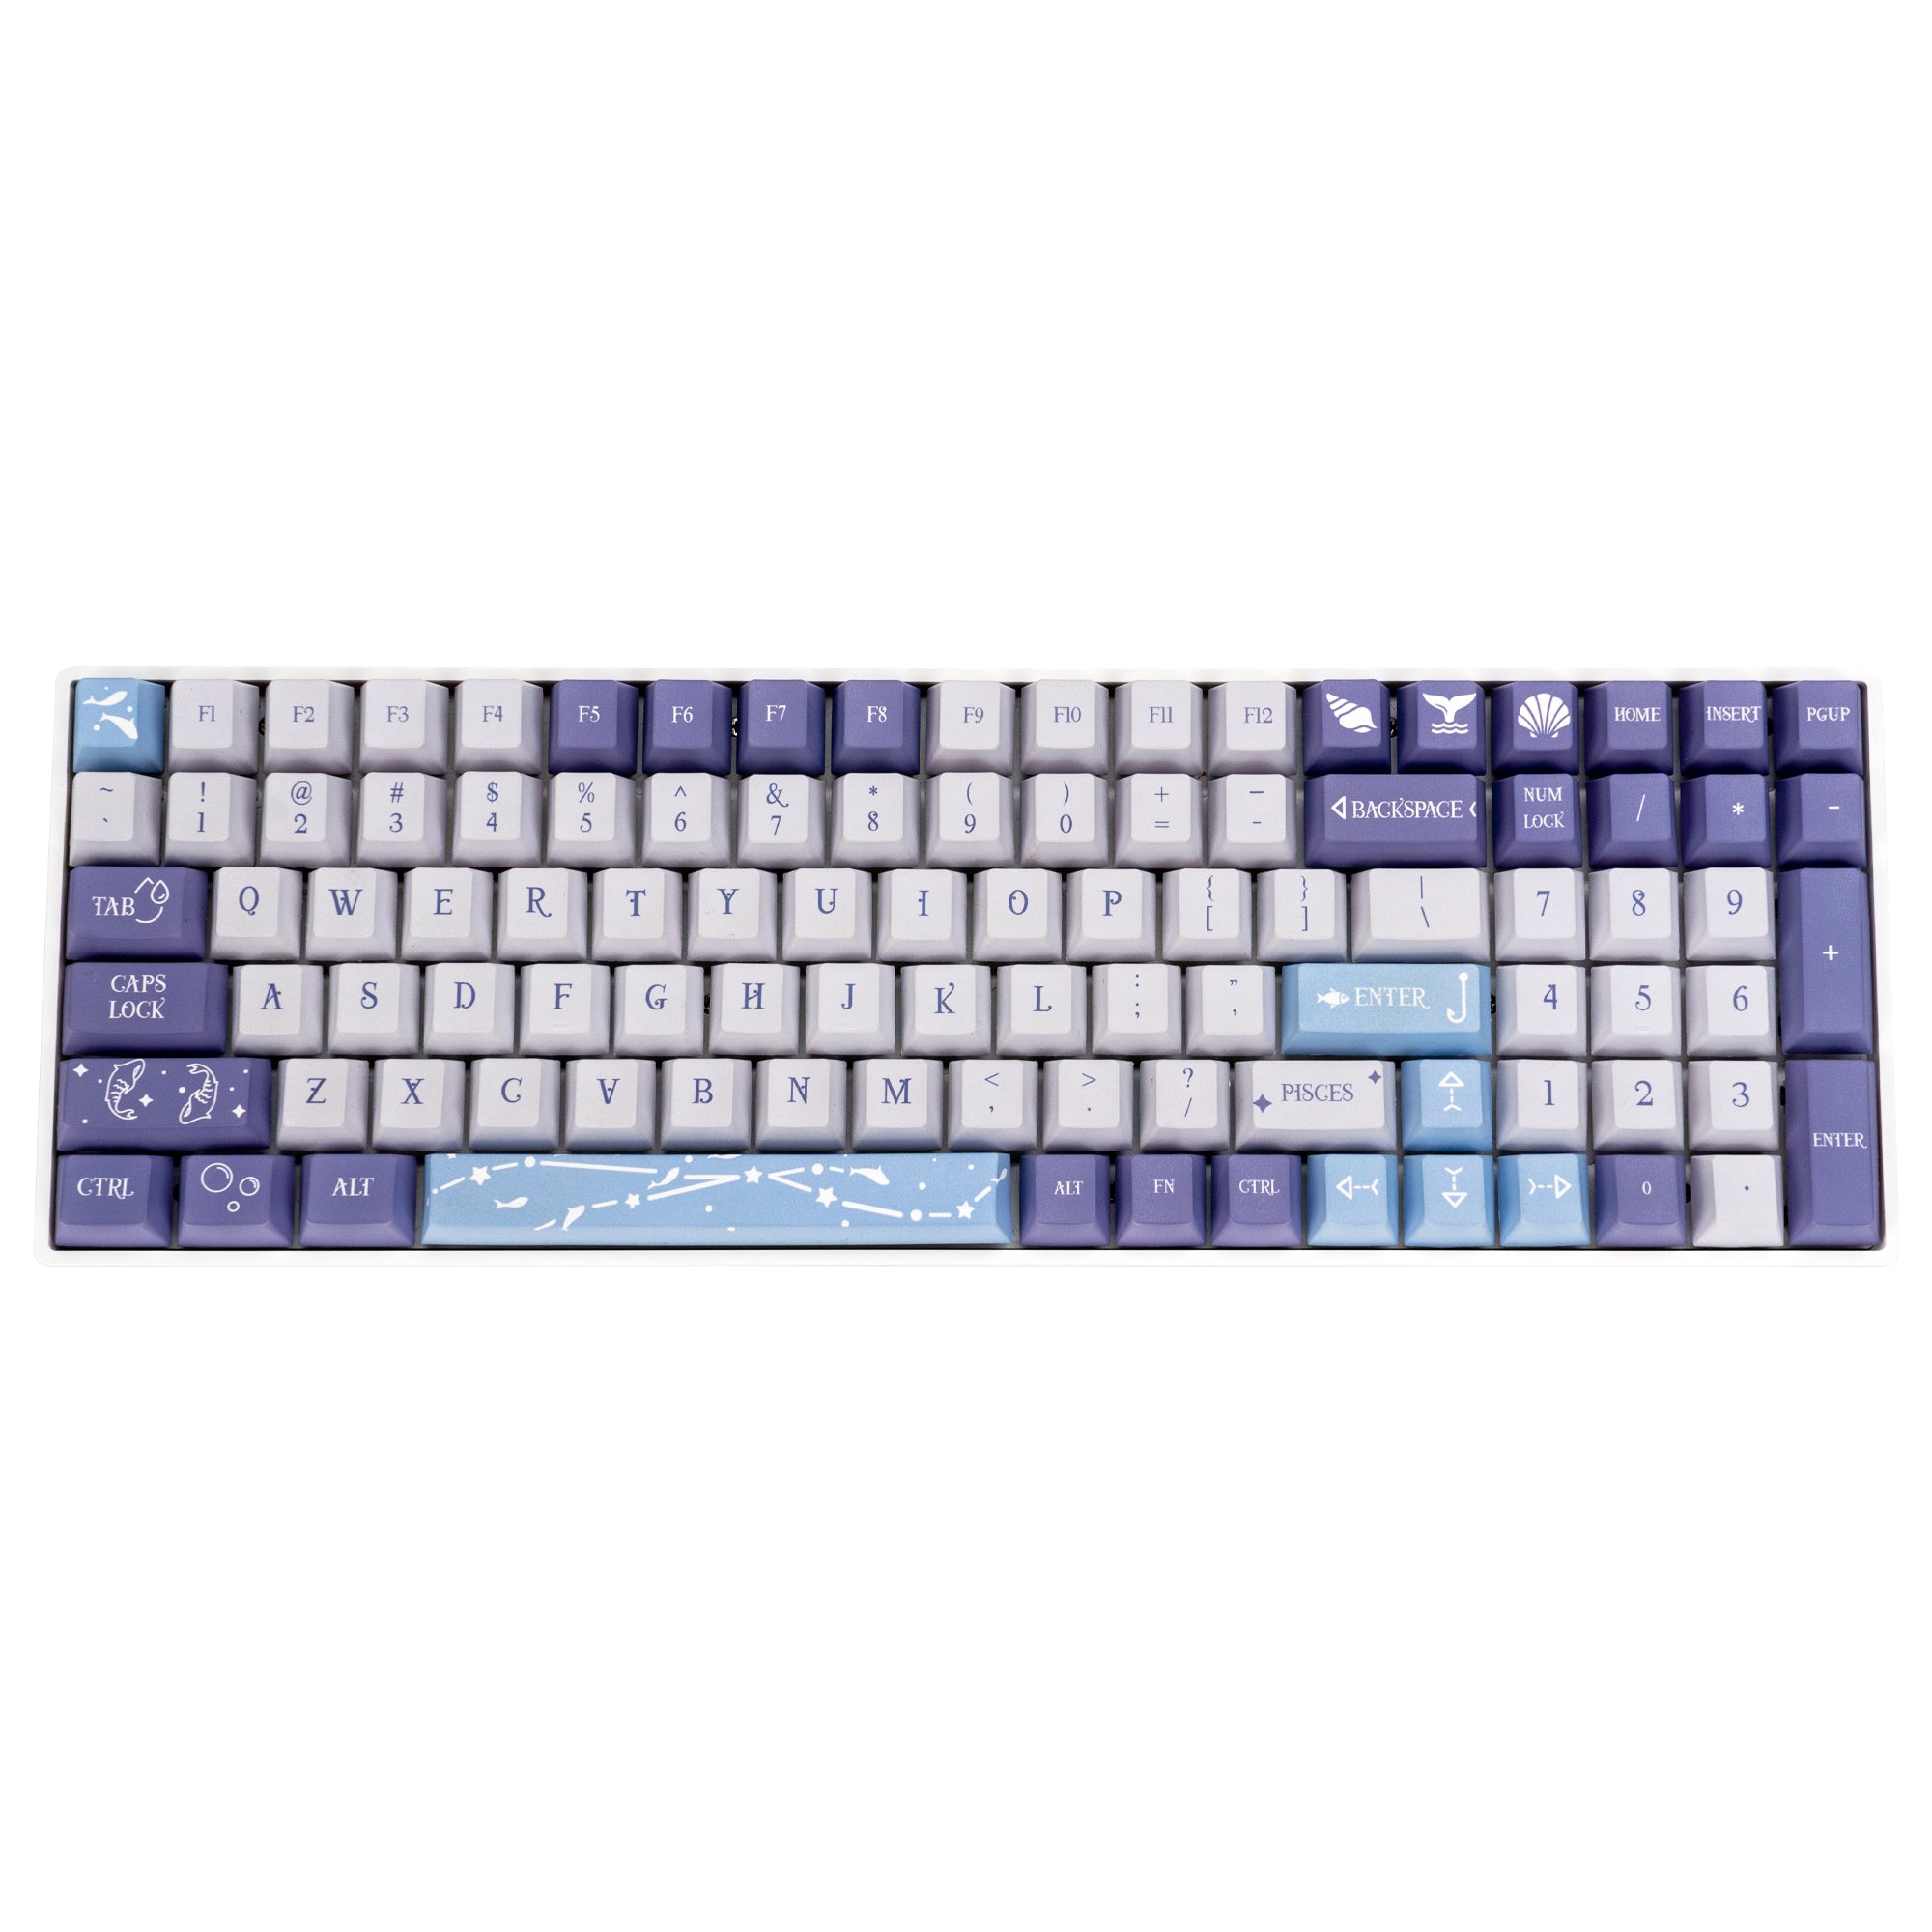 pisces-constellation-seriesproducts-mechanical-keyboard-keycaps-set